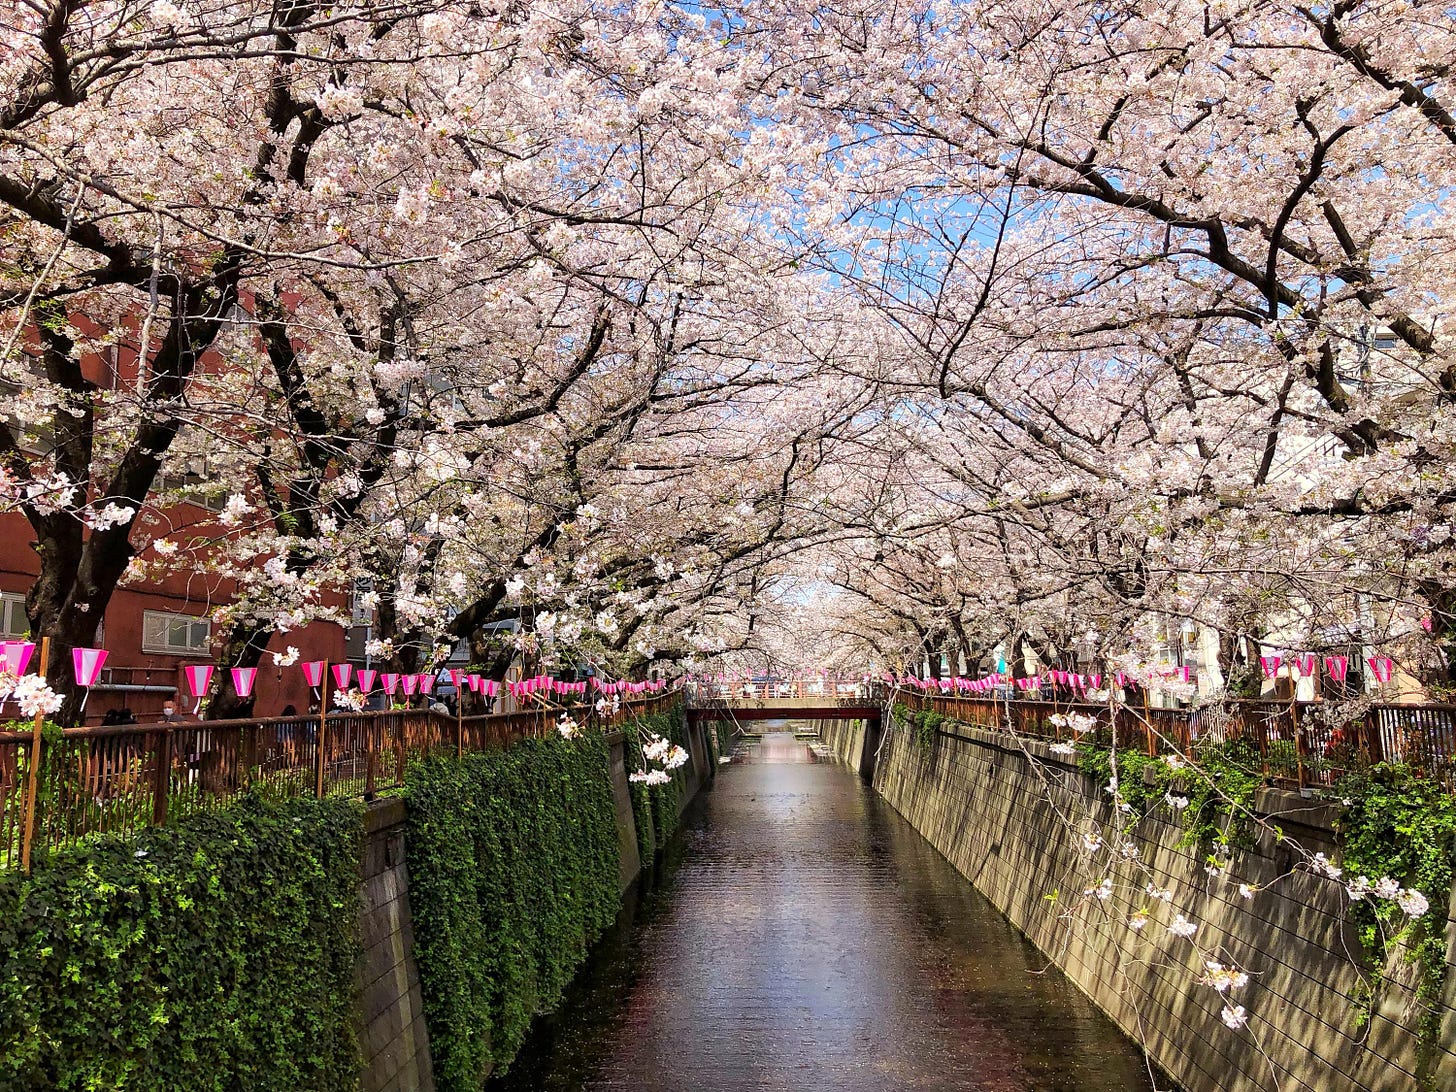 Japan cherry blossom 2021 forecast: early bloom expected in Tokyo